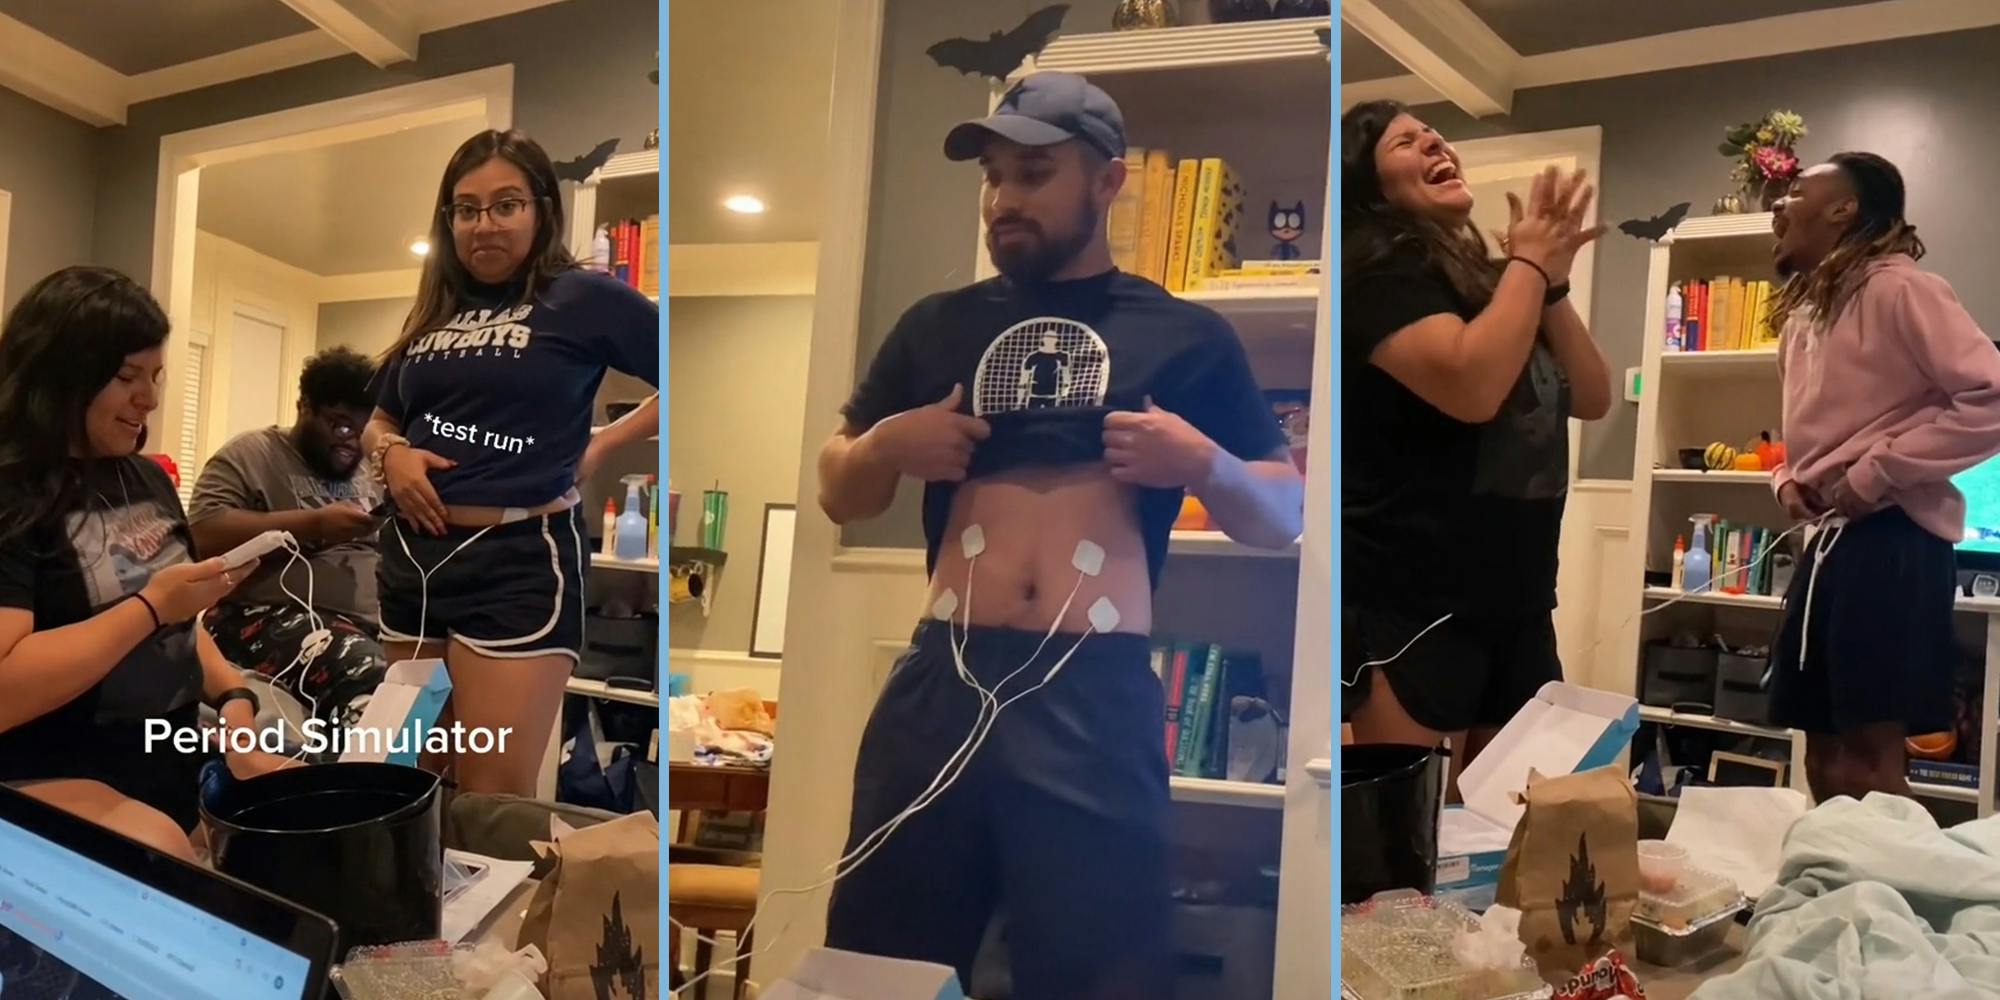 women trying "period simulator" (l) man with electrodes on abdomen with shirt raised (c) woman laughing and clapping while man reacts to period simulator (r)